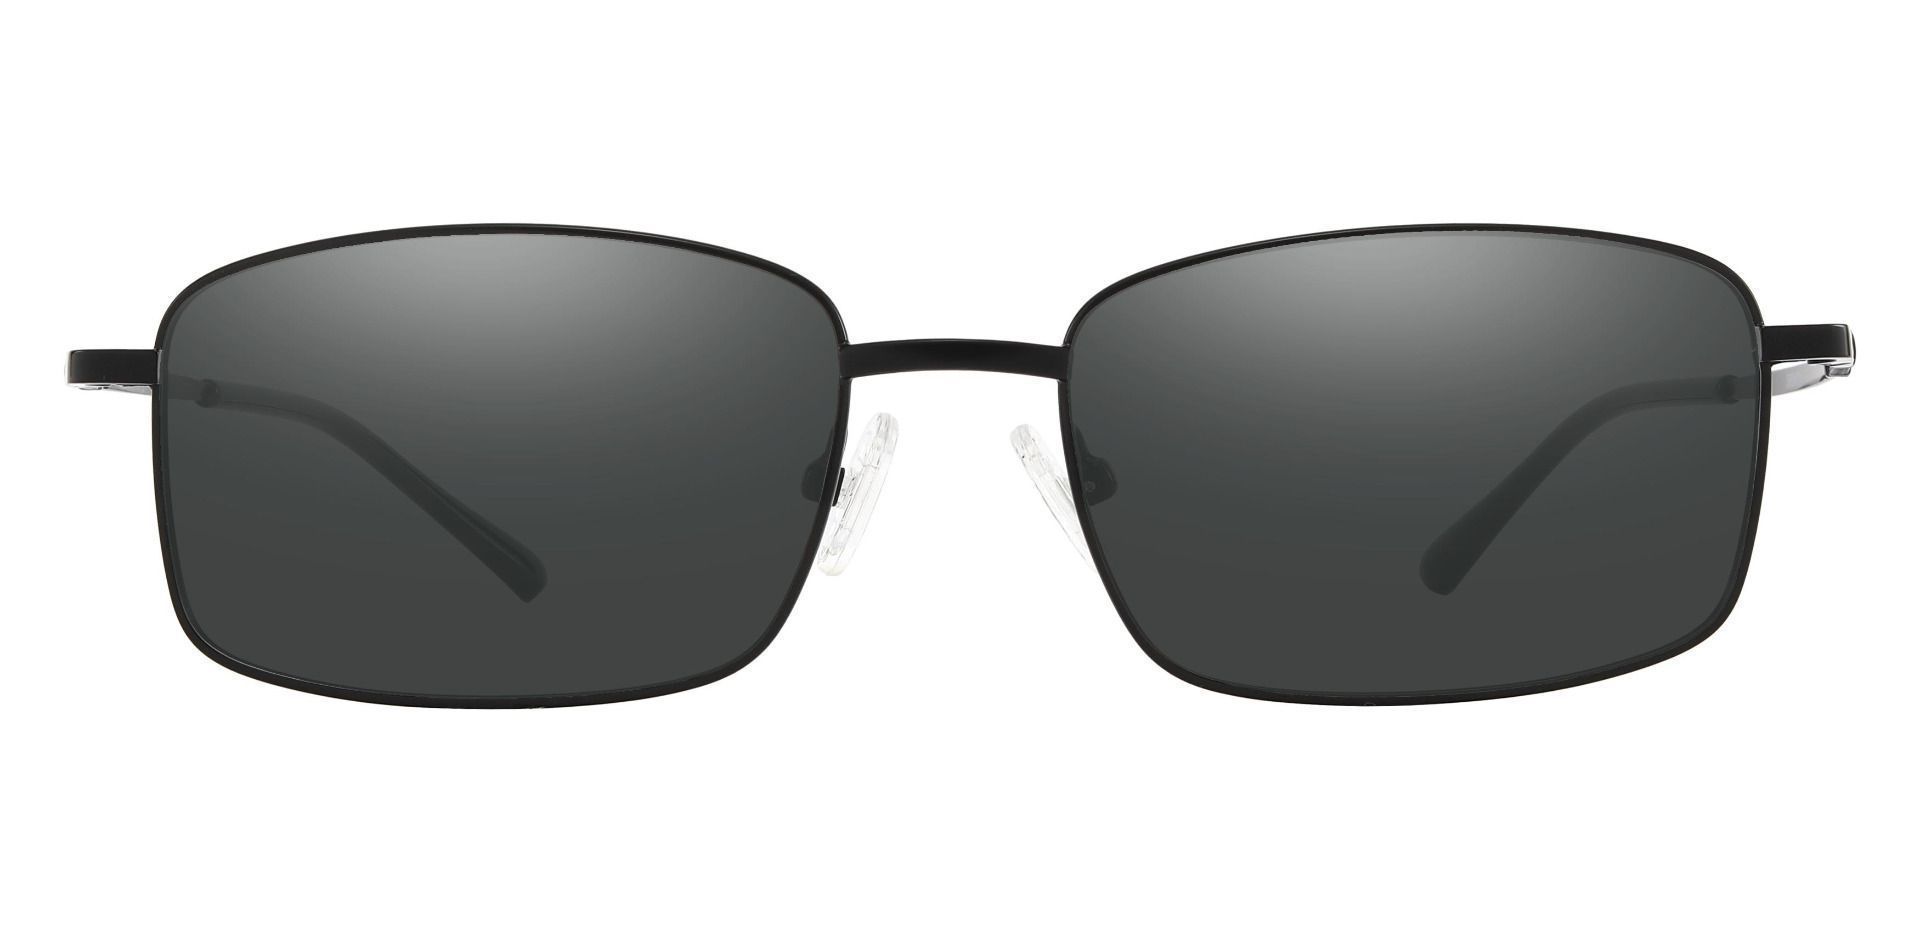 Clyde Rectangle Lined Bifocal Sunglasses - Black Frame With Gray Lenses